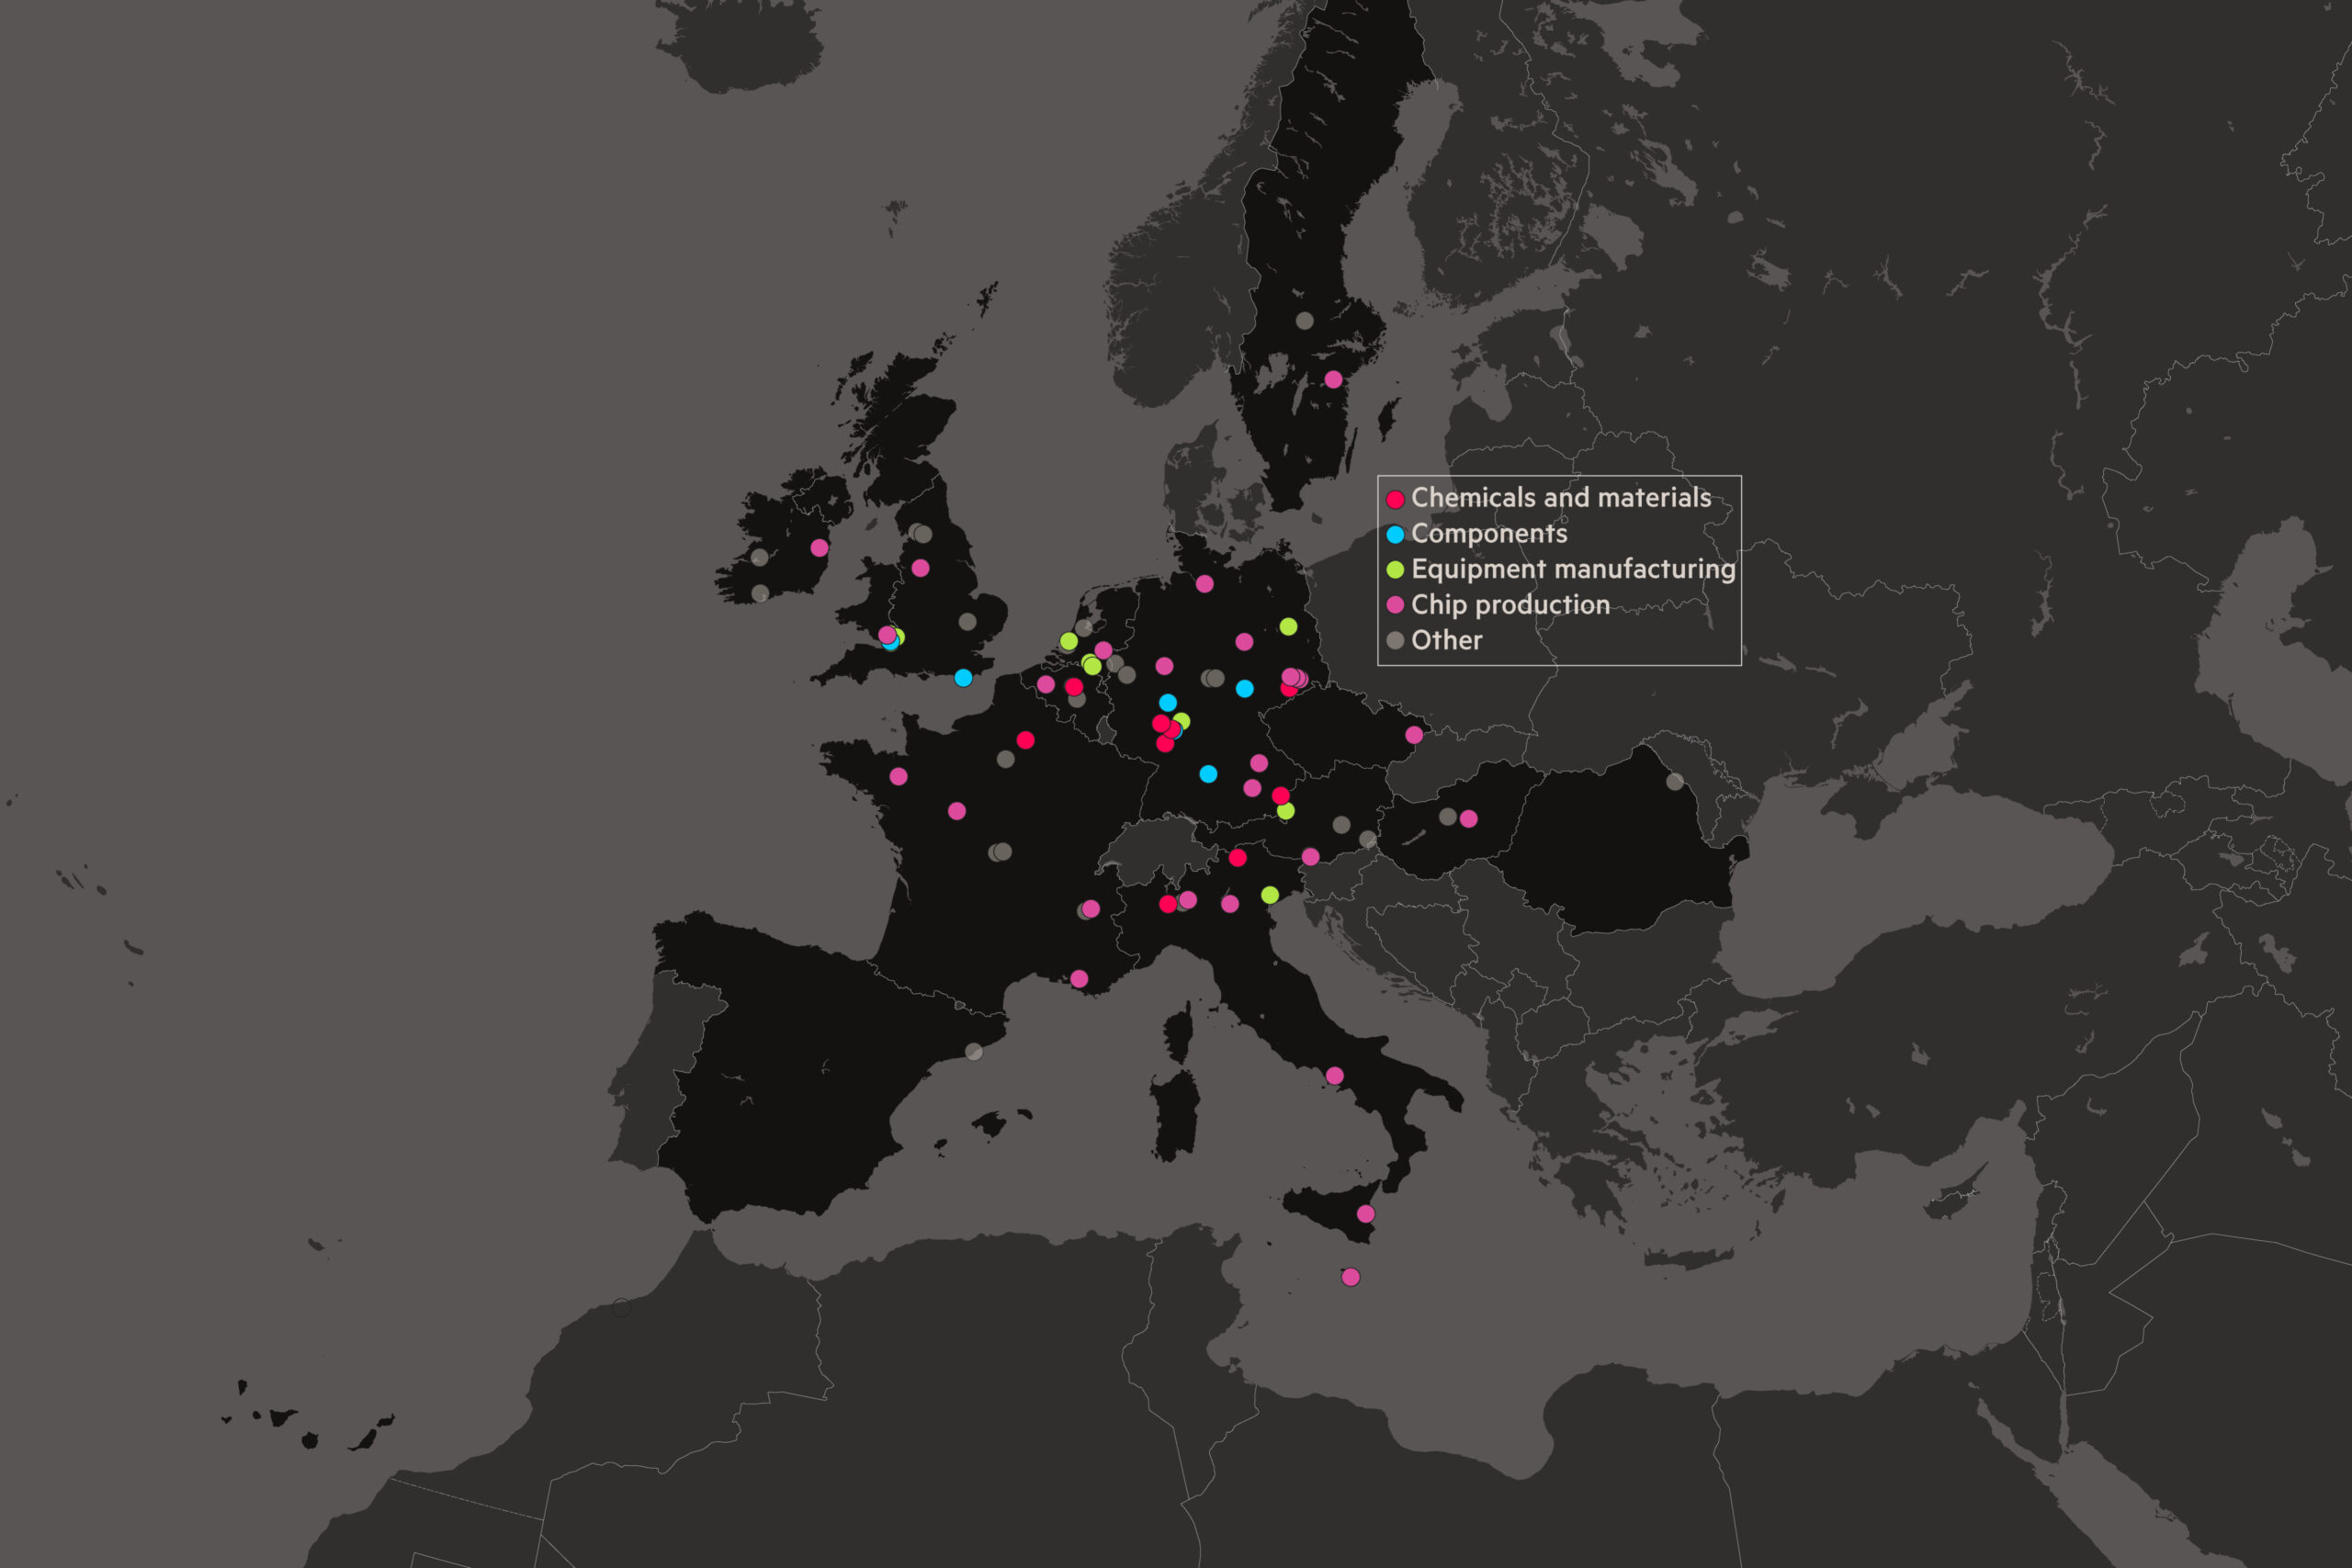 A map of semiconductor locations in Europe highlighting four categories: chemicals and materials; components; equipment manufacturing and chip production